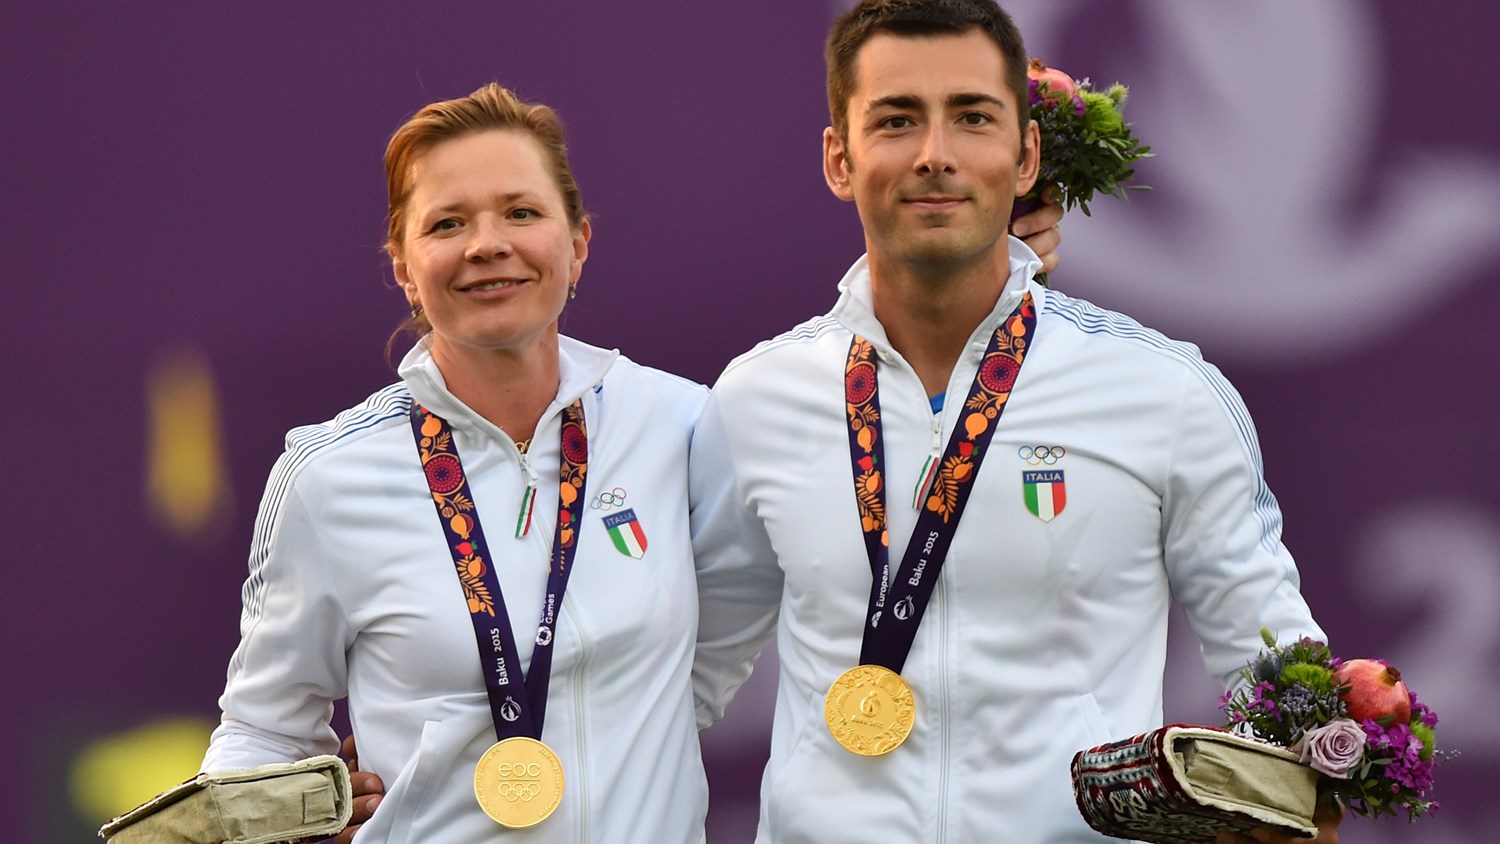 Archers win Italy's first gold medal of the European Games